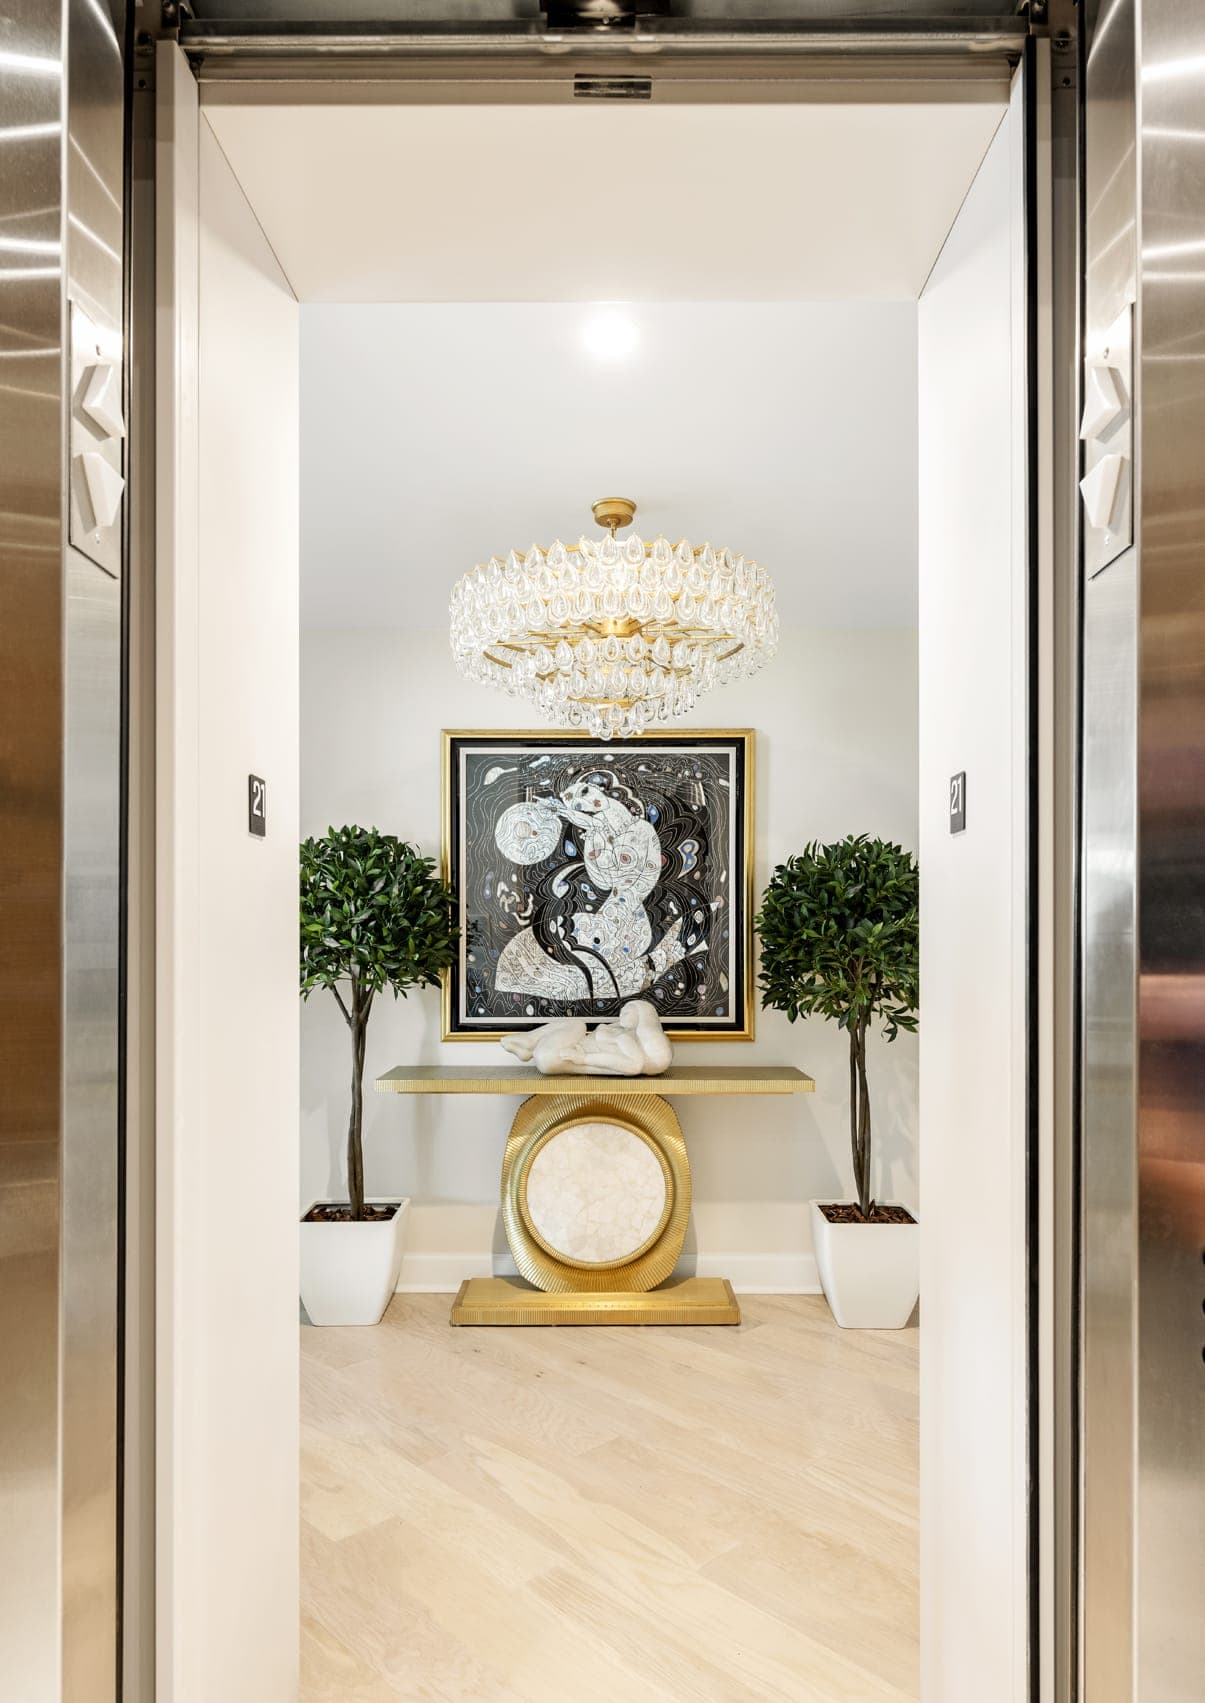 Lift Entrance To Condo Crystall Chandelier Gold Designer Table With White Stone Center Bay Bushes Abstract Dark Painting On Wall